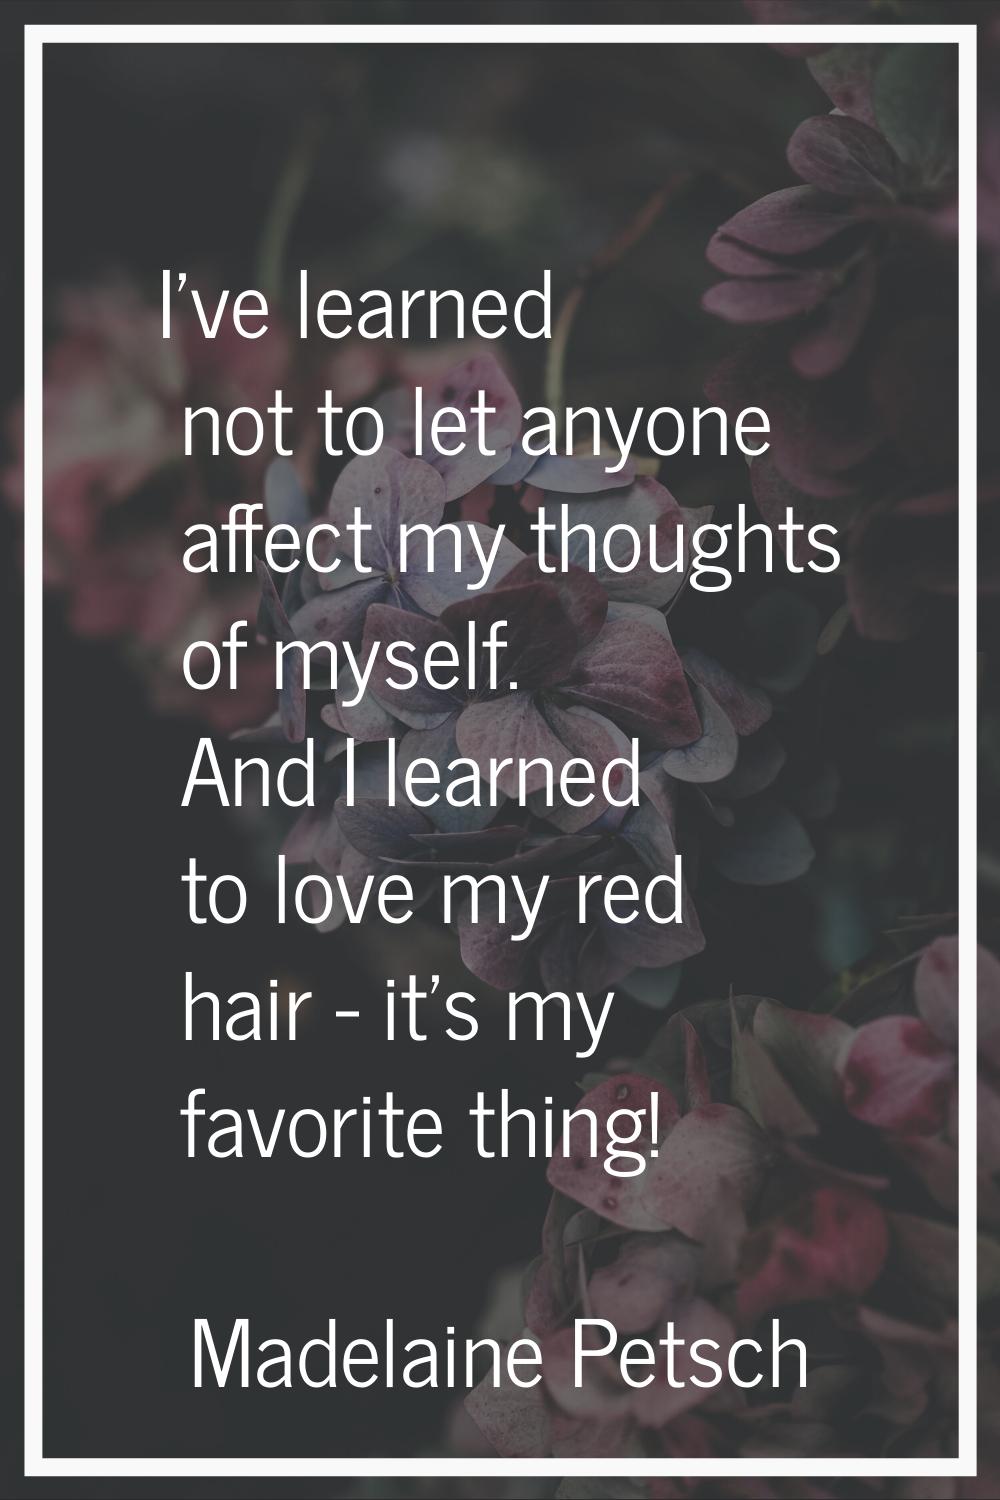 I've learned not to let anyone affect my thoughts of myself. And I learned to love my red hair - it